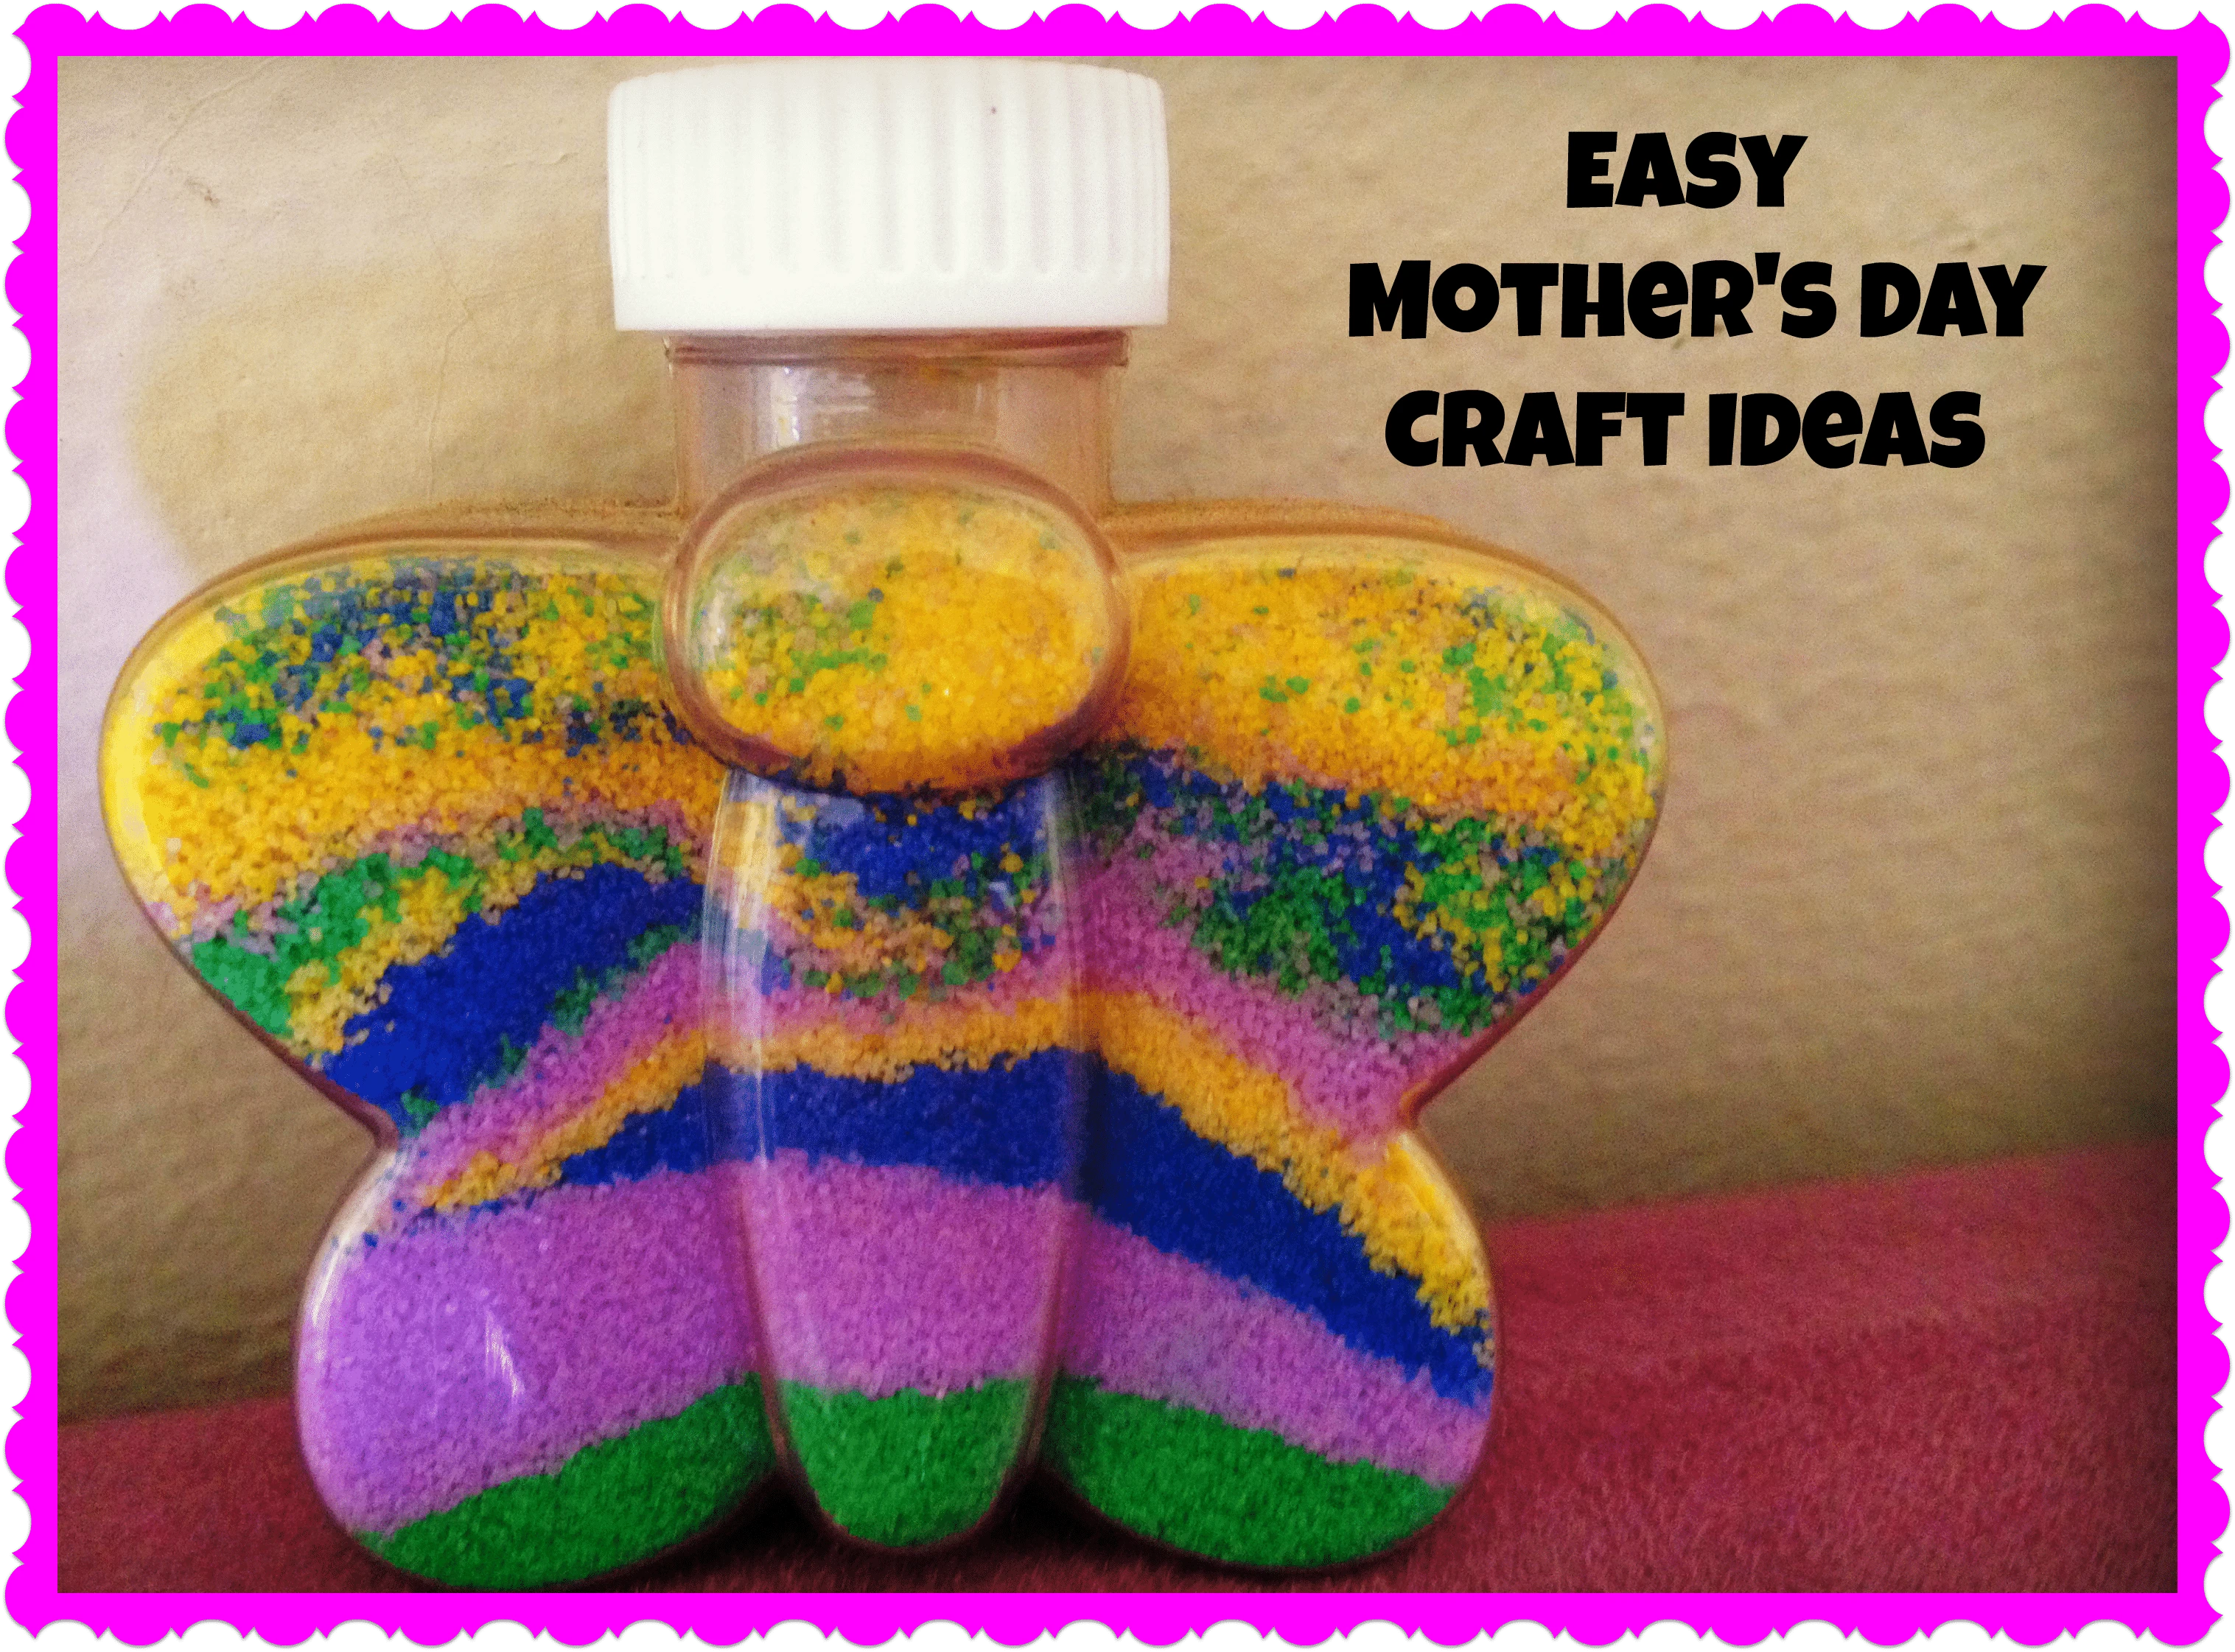 Easy Mother's Day Craft Ideas